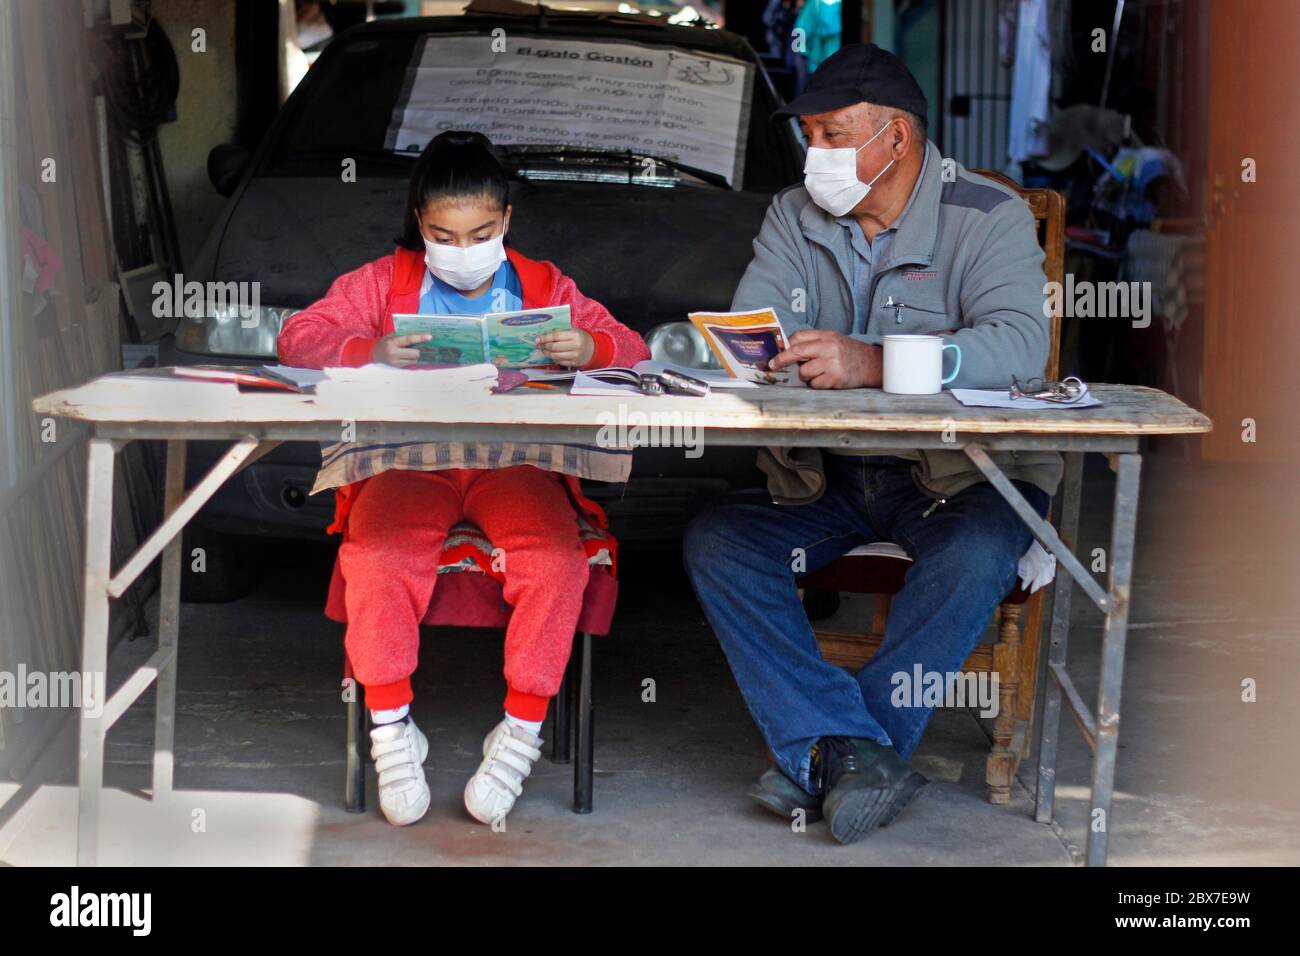 Santiago, Chile. 5th June, 2020. A girl studies with her grandfather in the garage of her home in the midst of the total quarantine decreed by the government to prevent the spread of Covid-19. More than 4 million schoolchildren in Chile are at home due to the suspension of face-to-face classes suspended since March, a measure adopted by the Government to help control the Covid-19 outbreak. Credit: Sebastian Silva/ZUMA Wire/Alamy Live News Stock Photo